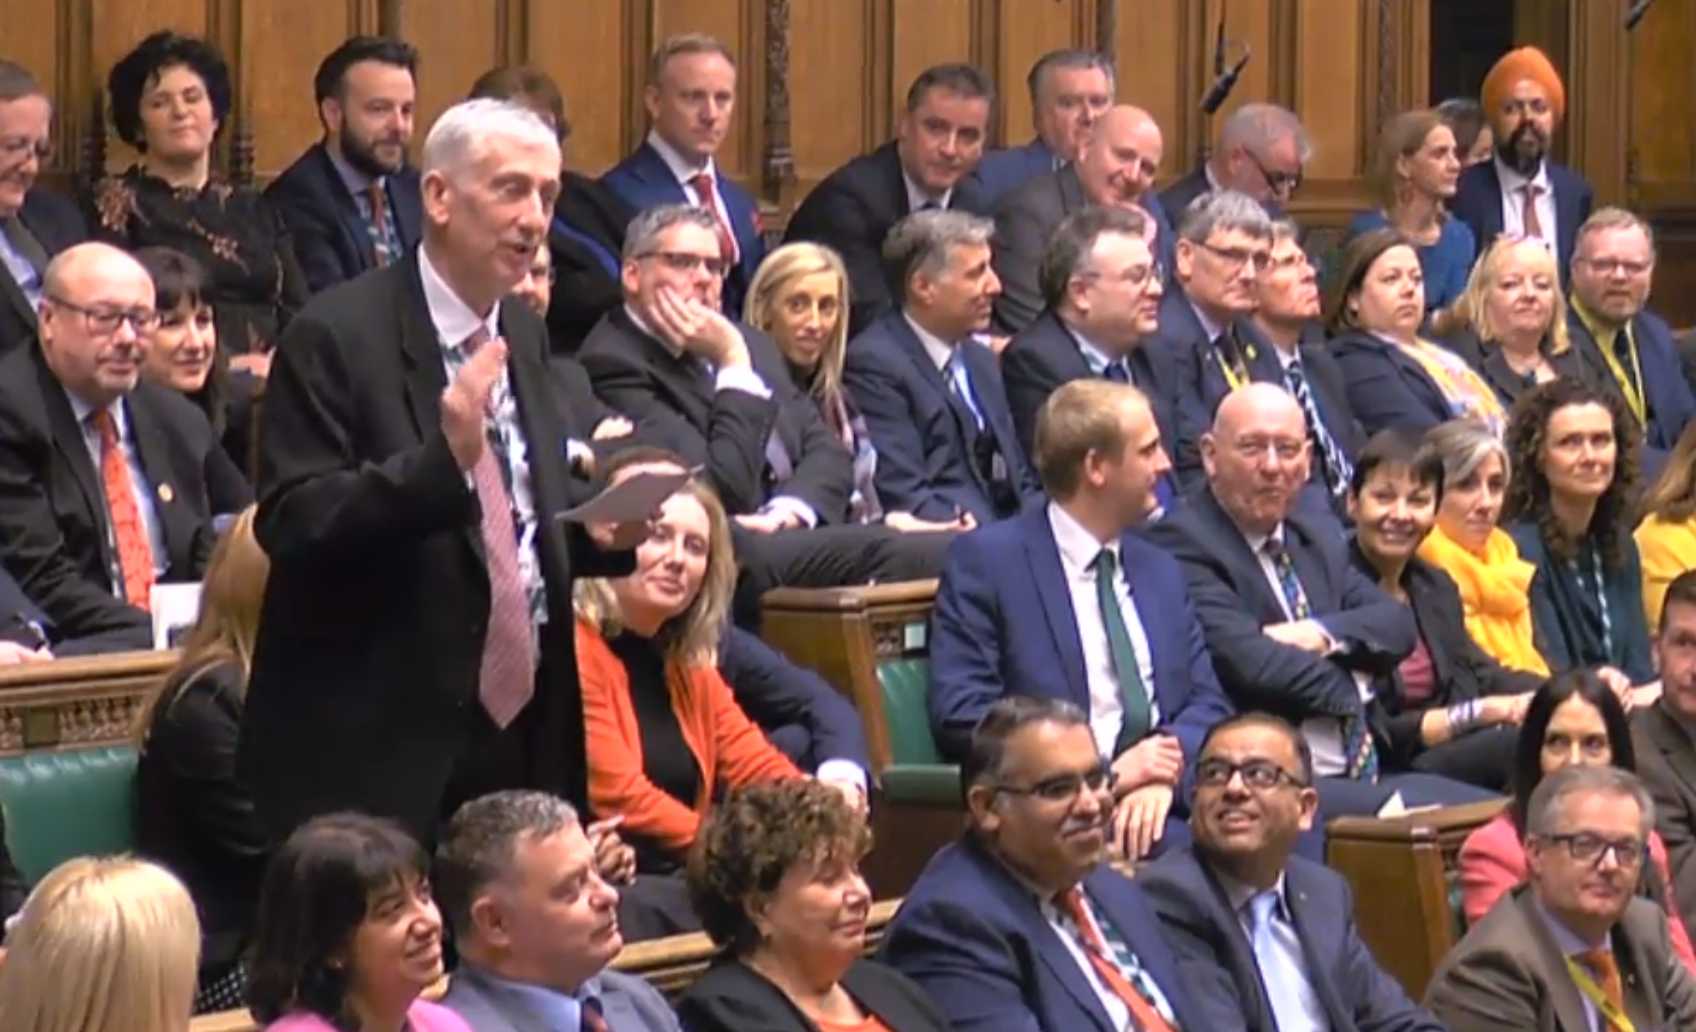 Sir Lindsay Hoyle makes his pitch to return as Speaker 